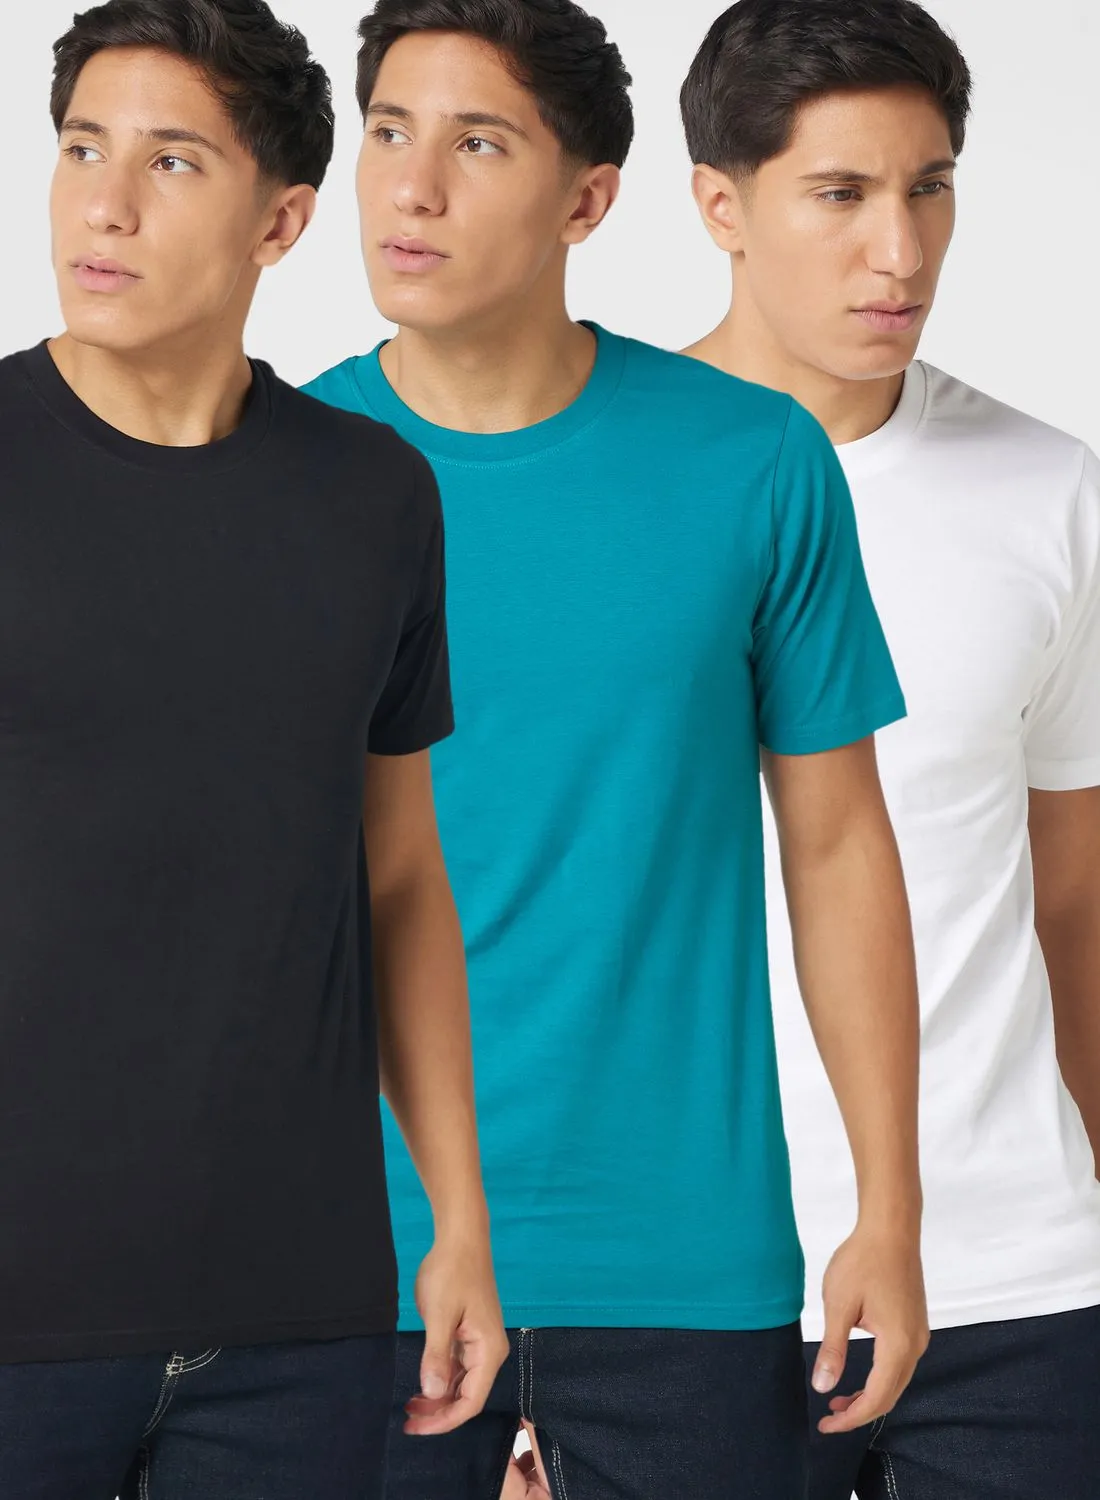 Seventy Five 3 Pack Essential Crew Neck T-shirts